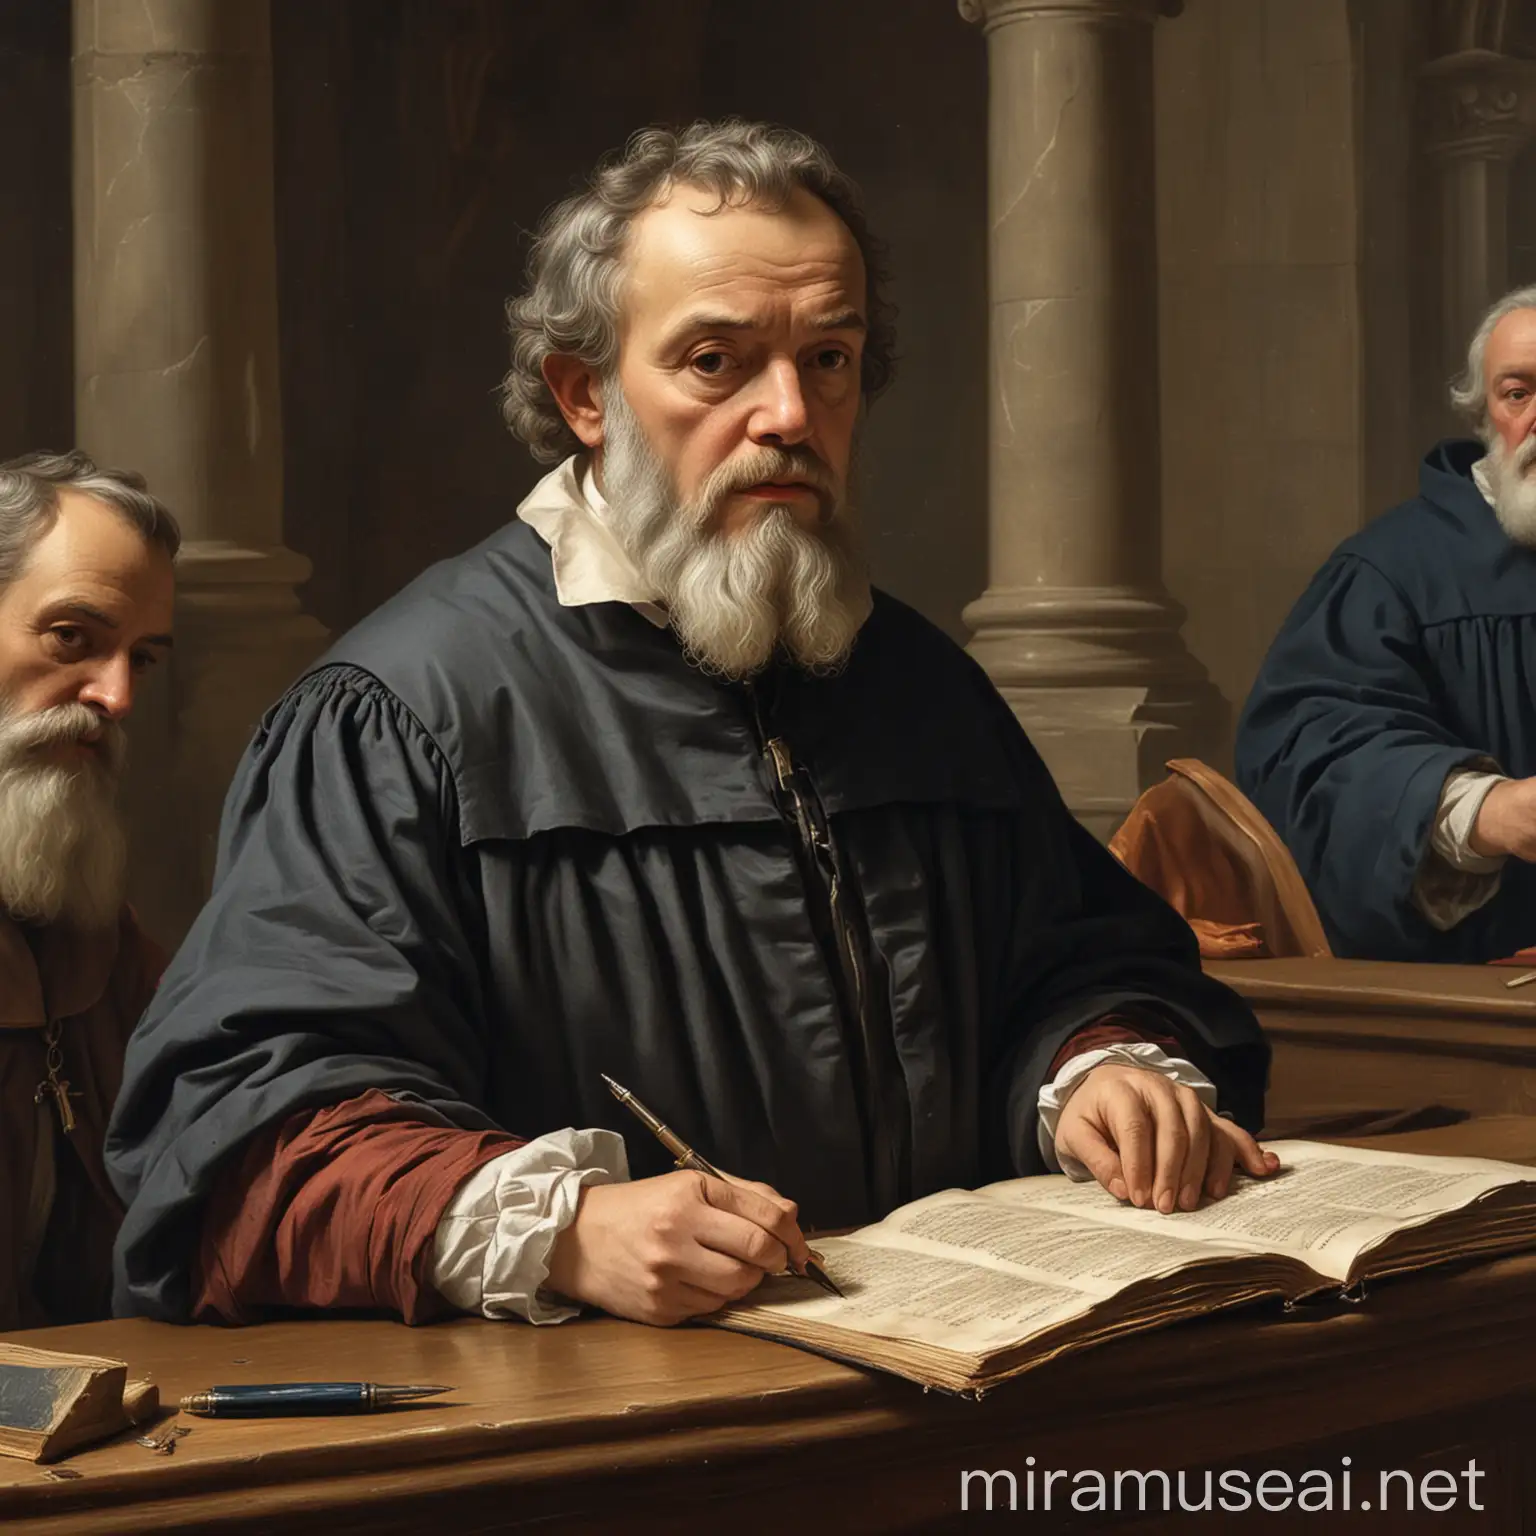 Galileo on Trial in Church Historical Renaissance Scientist in Confrontation